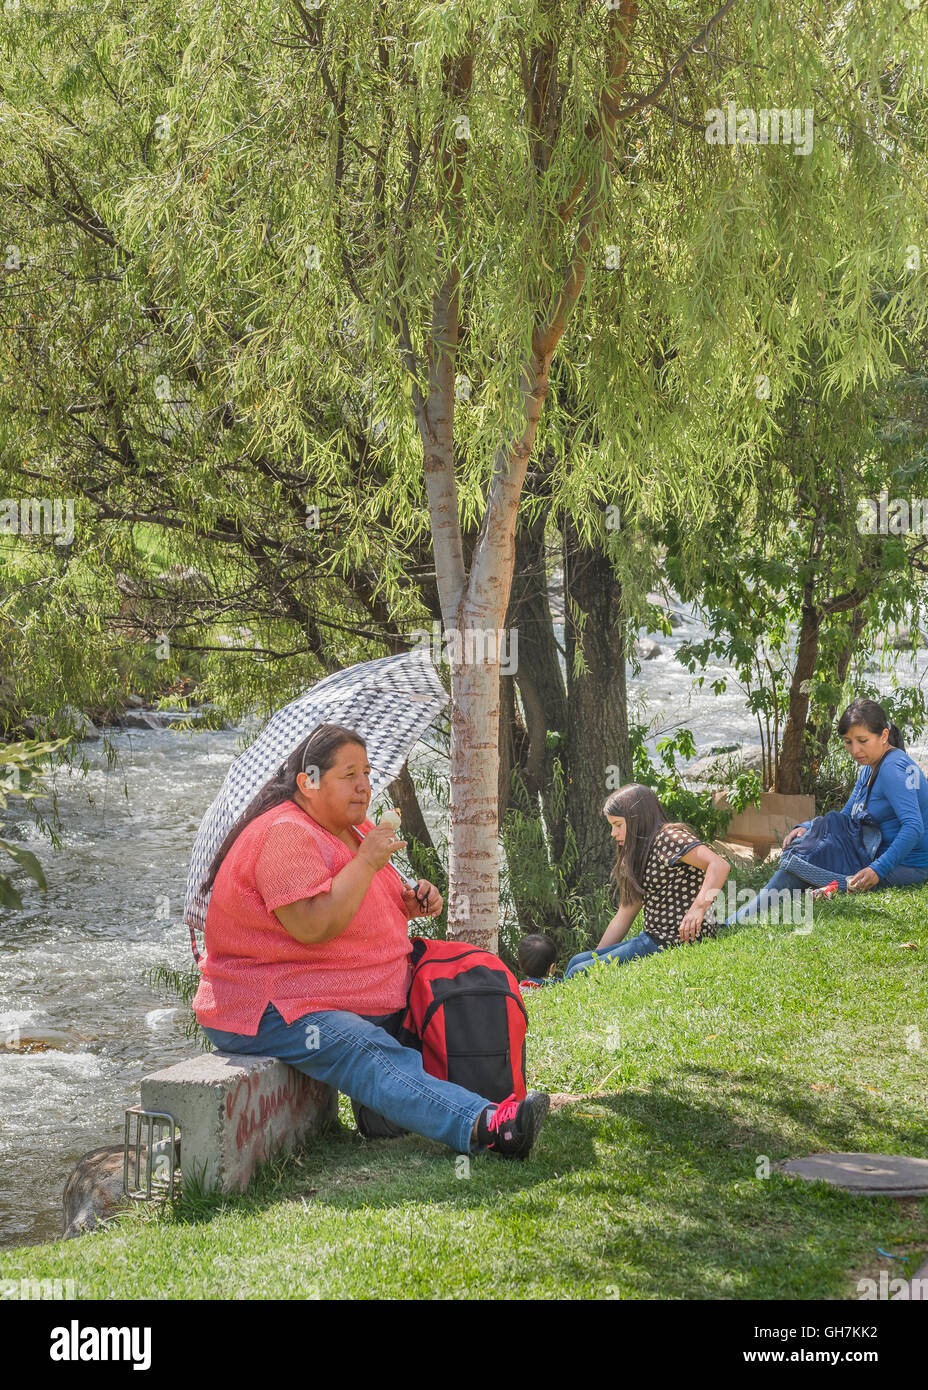 CUENCA, ECUADOR, NOVEMBER - 2015 - Group of people enjoying the day at park in front of river in Cuenca, Ecuador Stock Photo